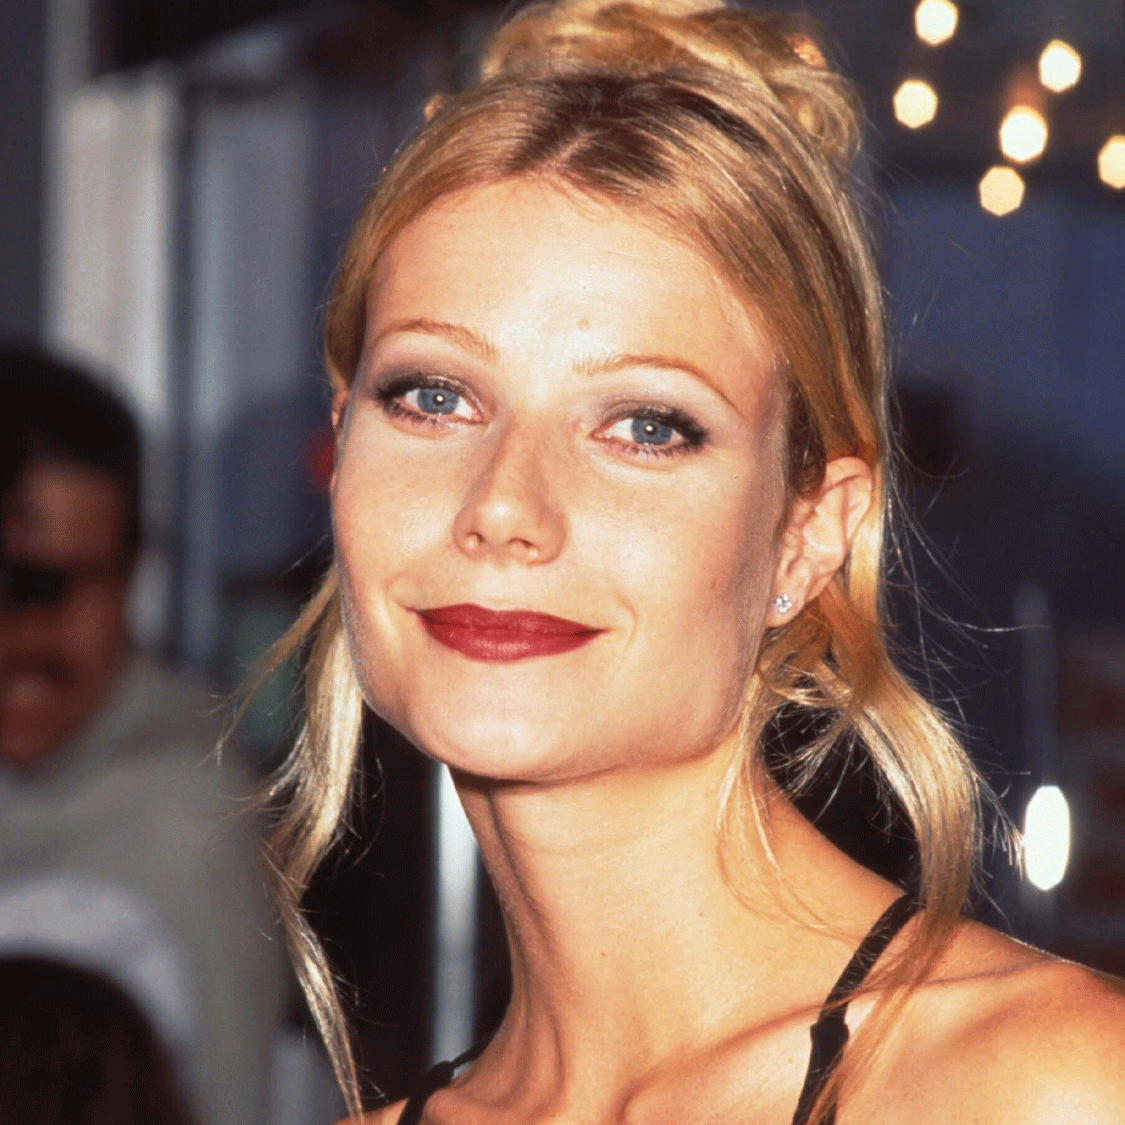 From Gwyneth to Halle, These Are the '90s Updos I'm Desperate to Re-Create